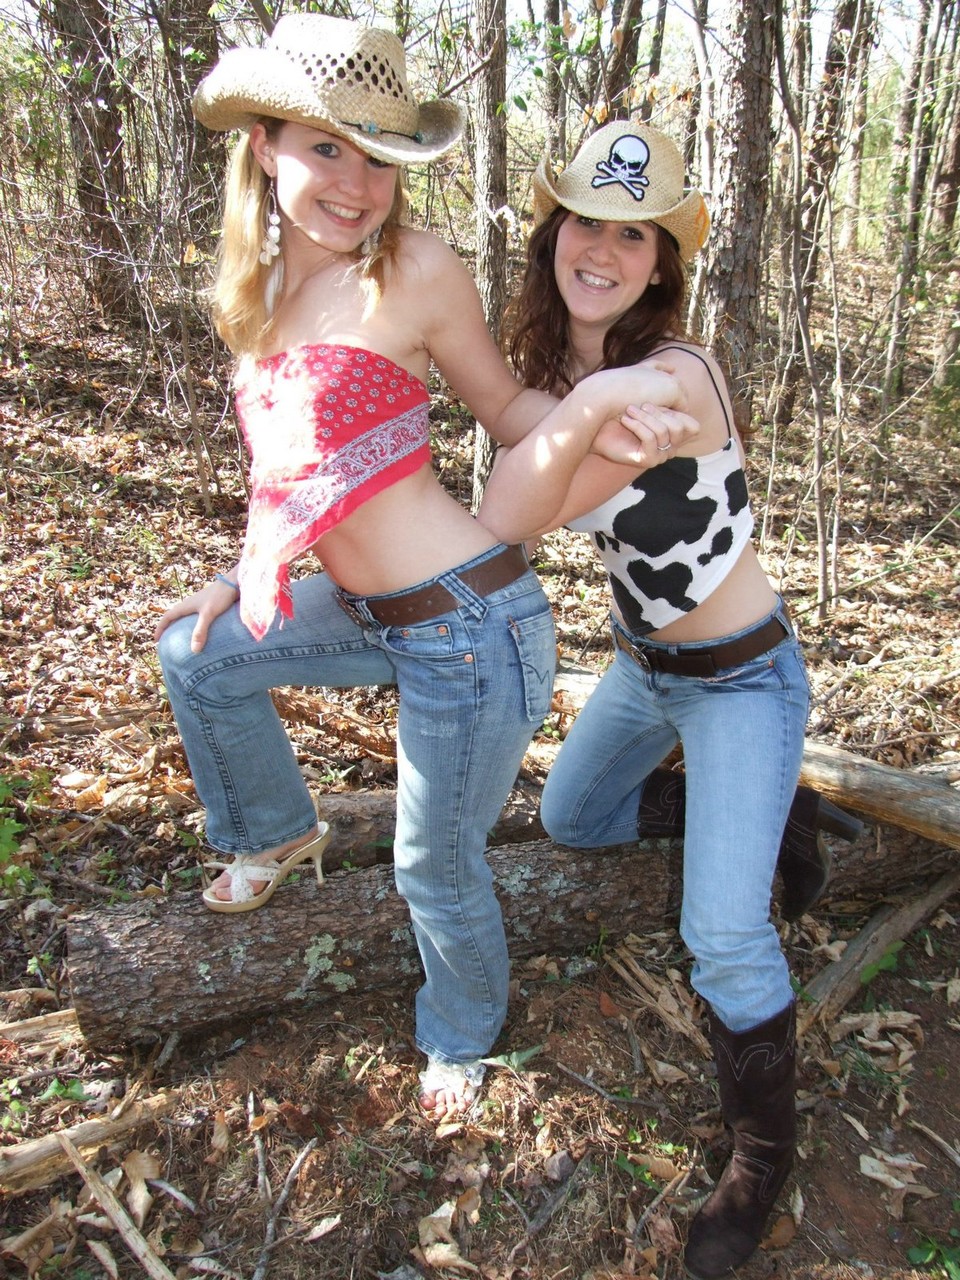 Cowgirl lesbians Kitty and Anna show their titties in the forest 포르노 사진 #427006705 | Teen Dreams Pics, Anna, Kitty, Jeans, 모바일 포르노